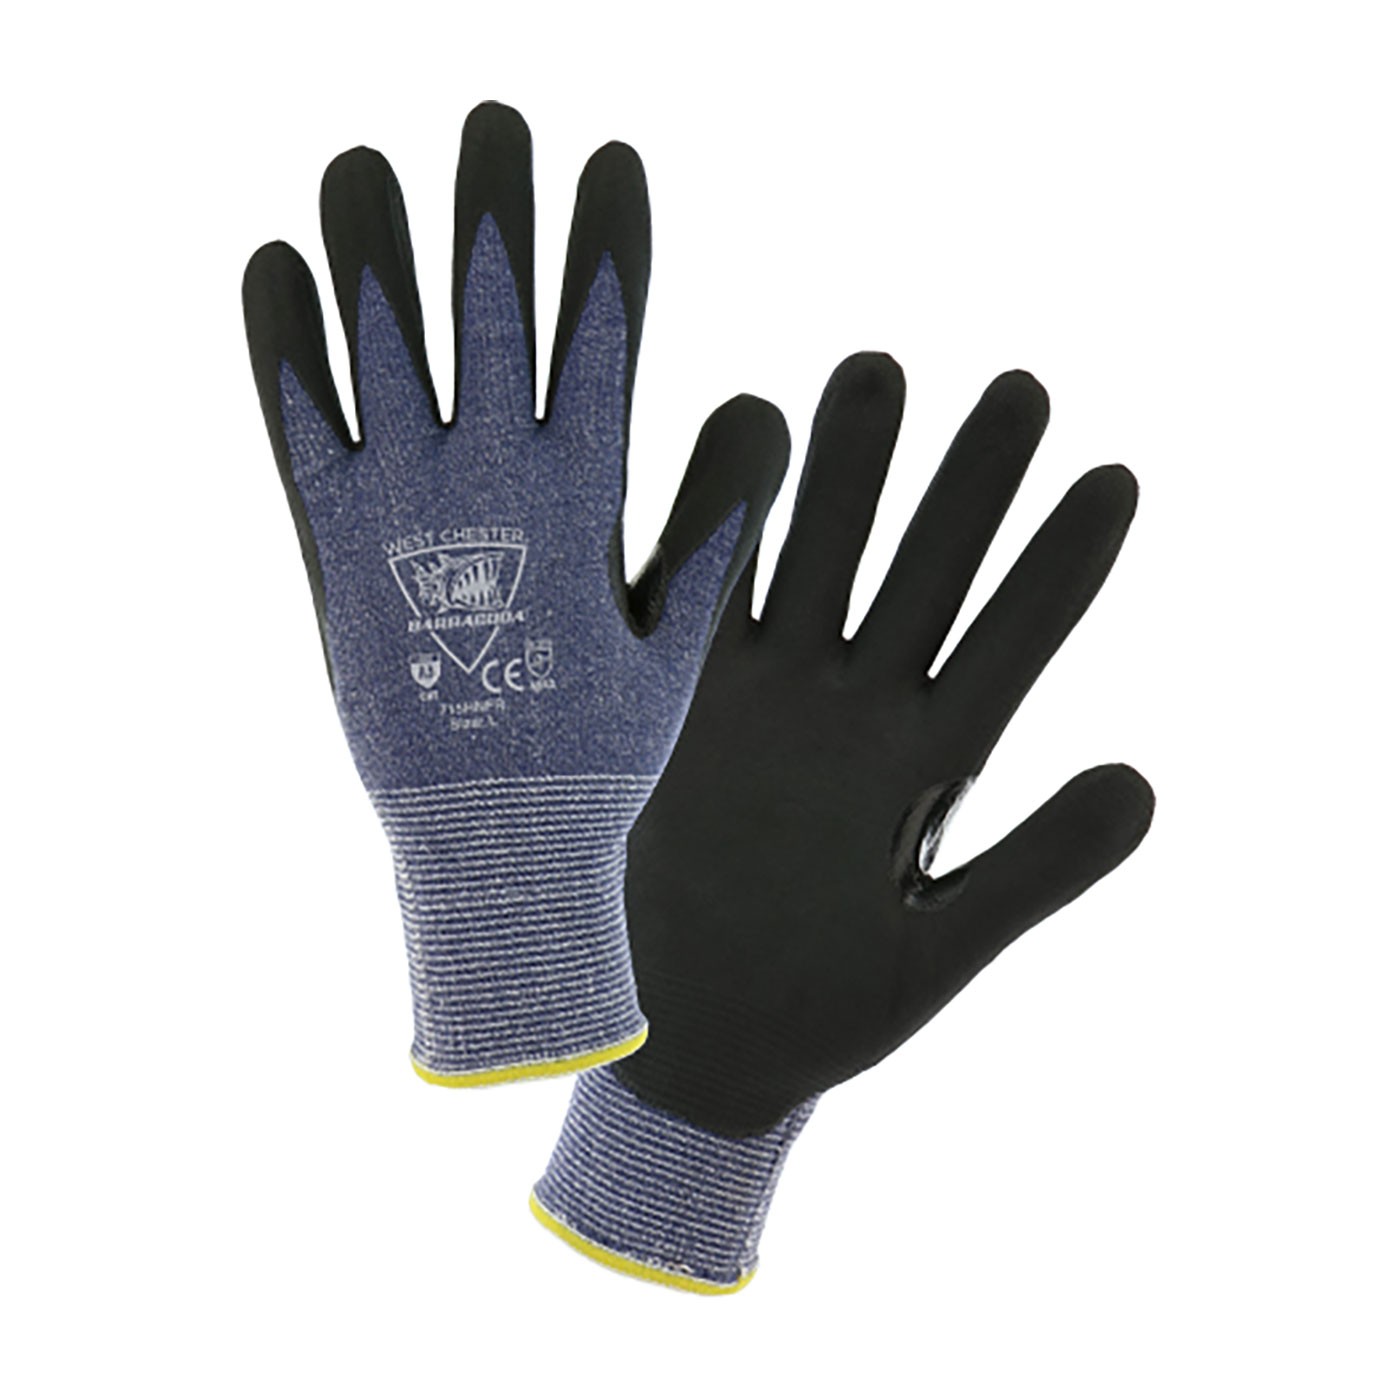 Barracuda® Seamless Knit HPPE Blended Glove with Nitrile Coated Foam Grip on Palm & Fingers  (#715HNFR)